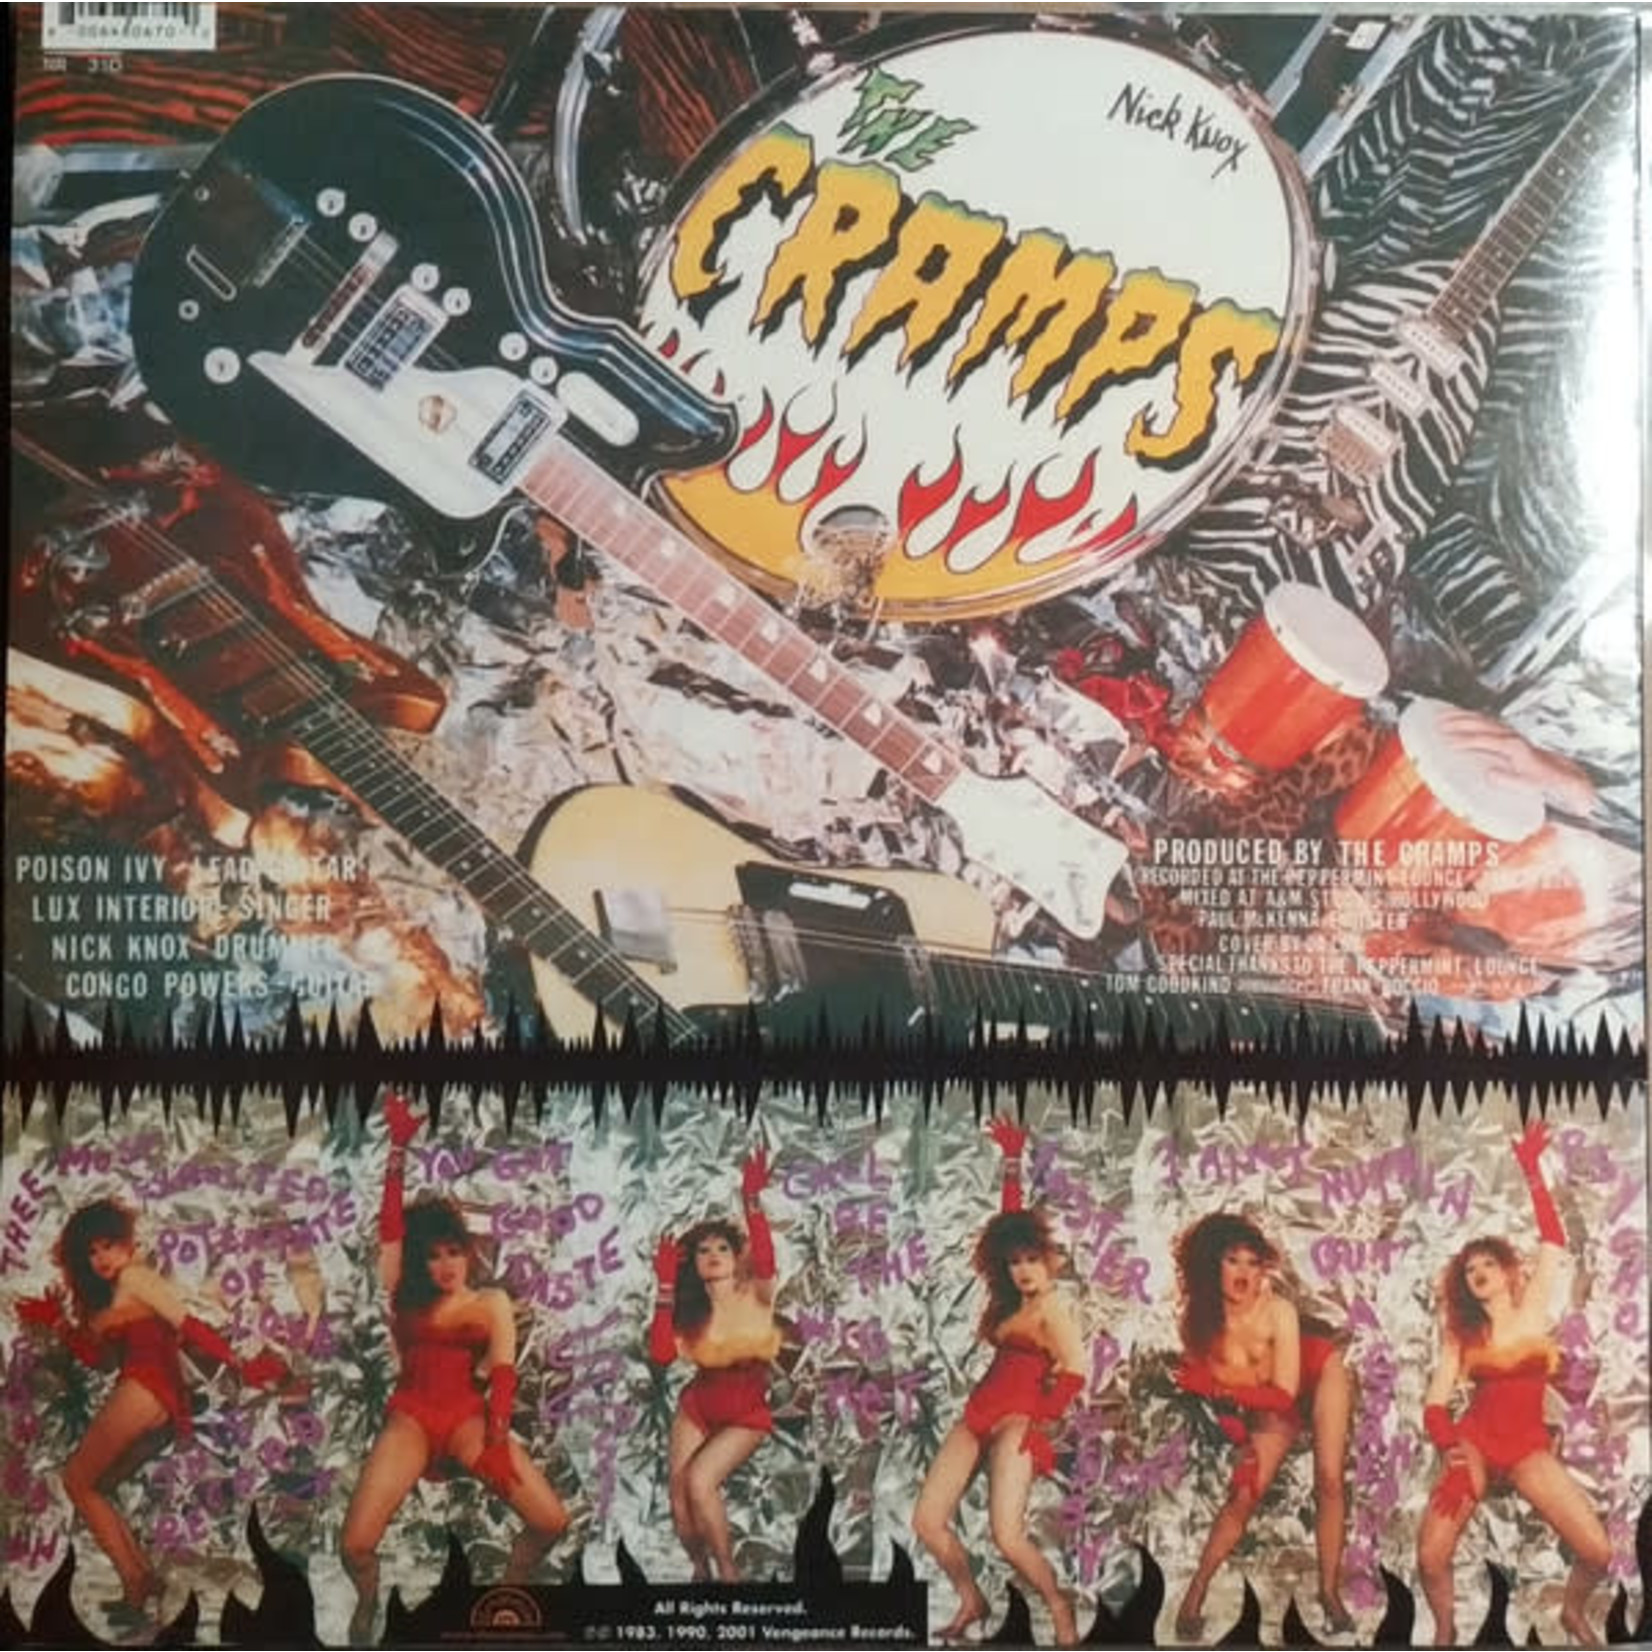 Big Beat Cramps - Smell of Female (LP)